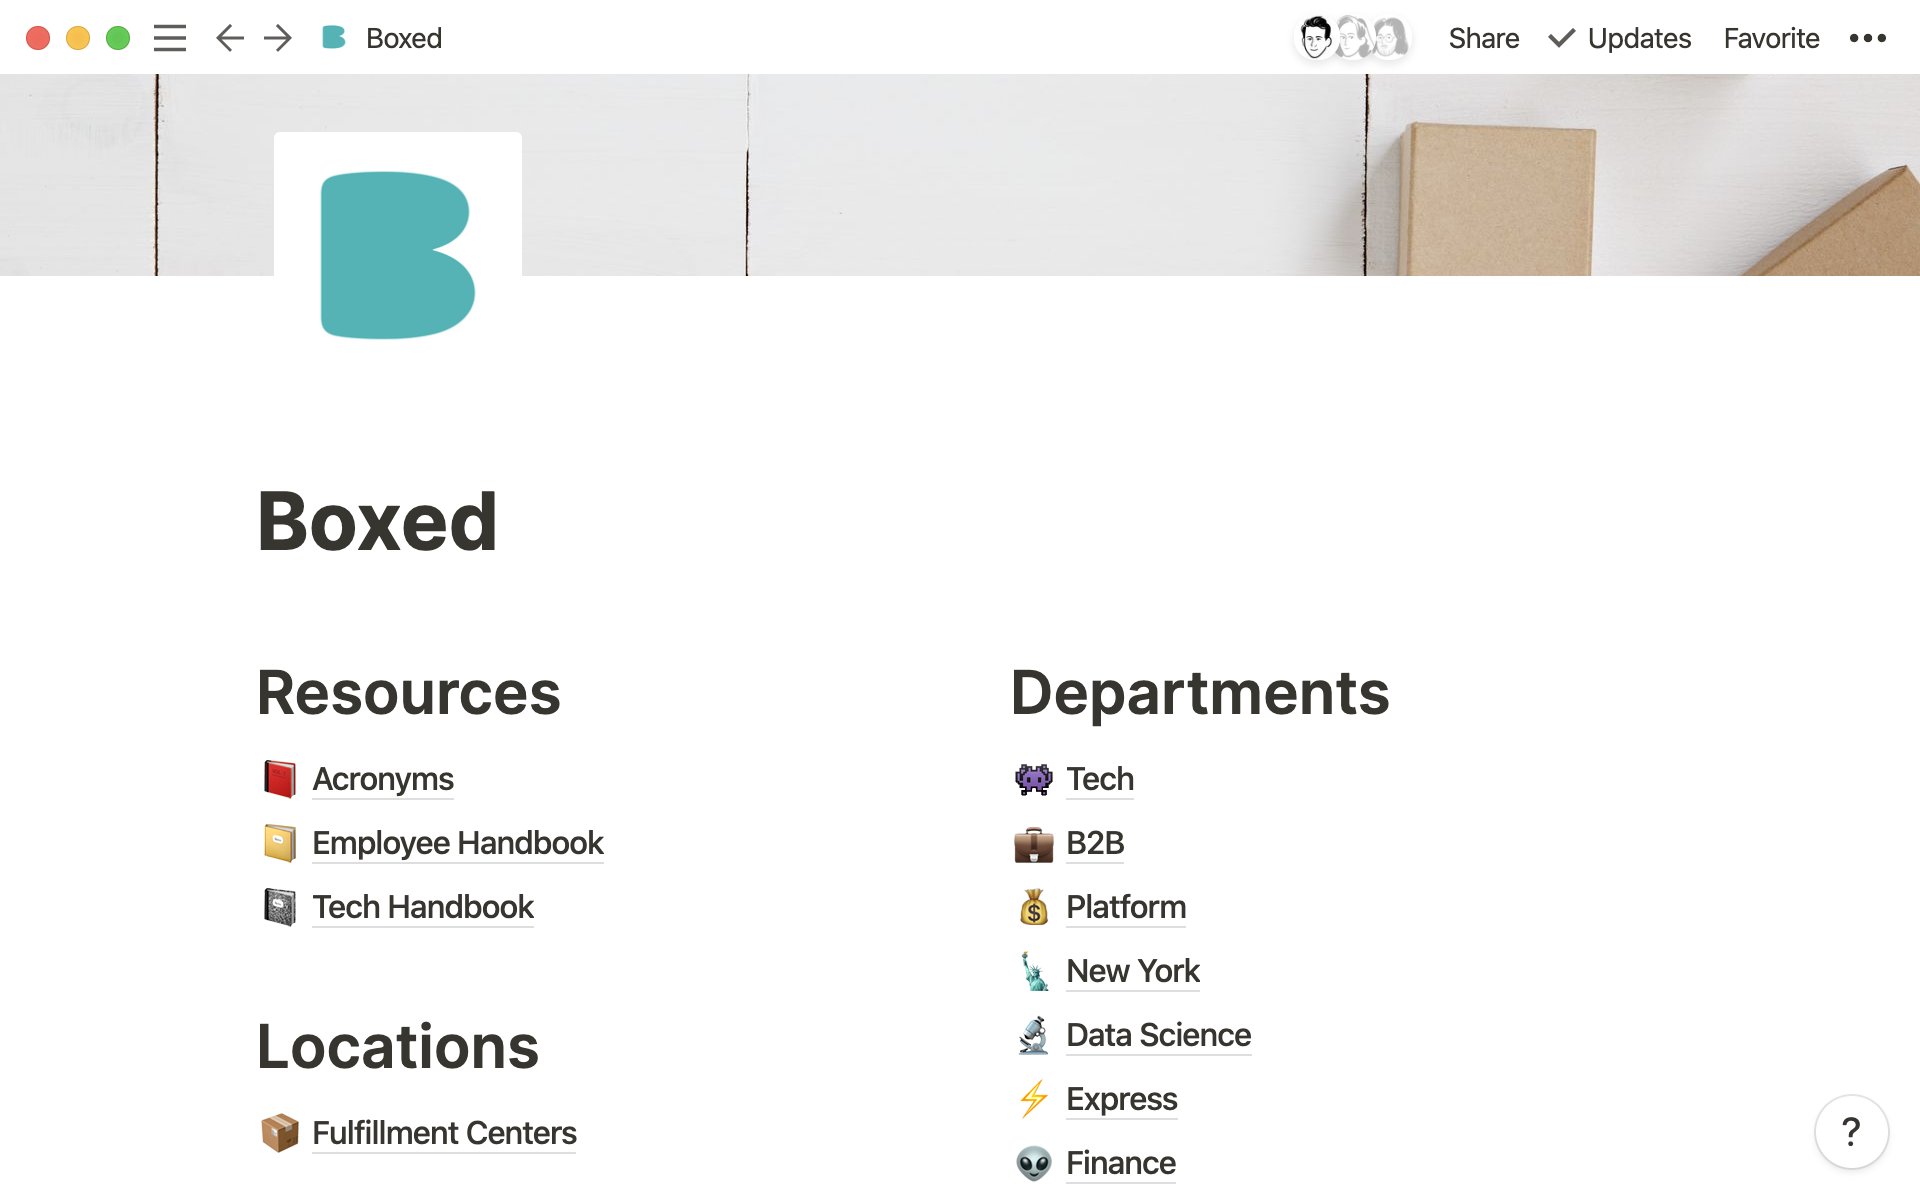 Boxed’s wiki unites all its team’s work and workflows.